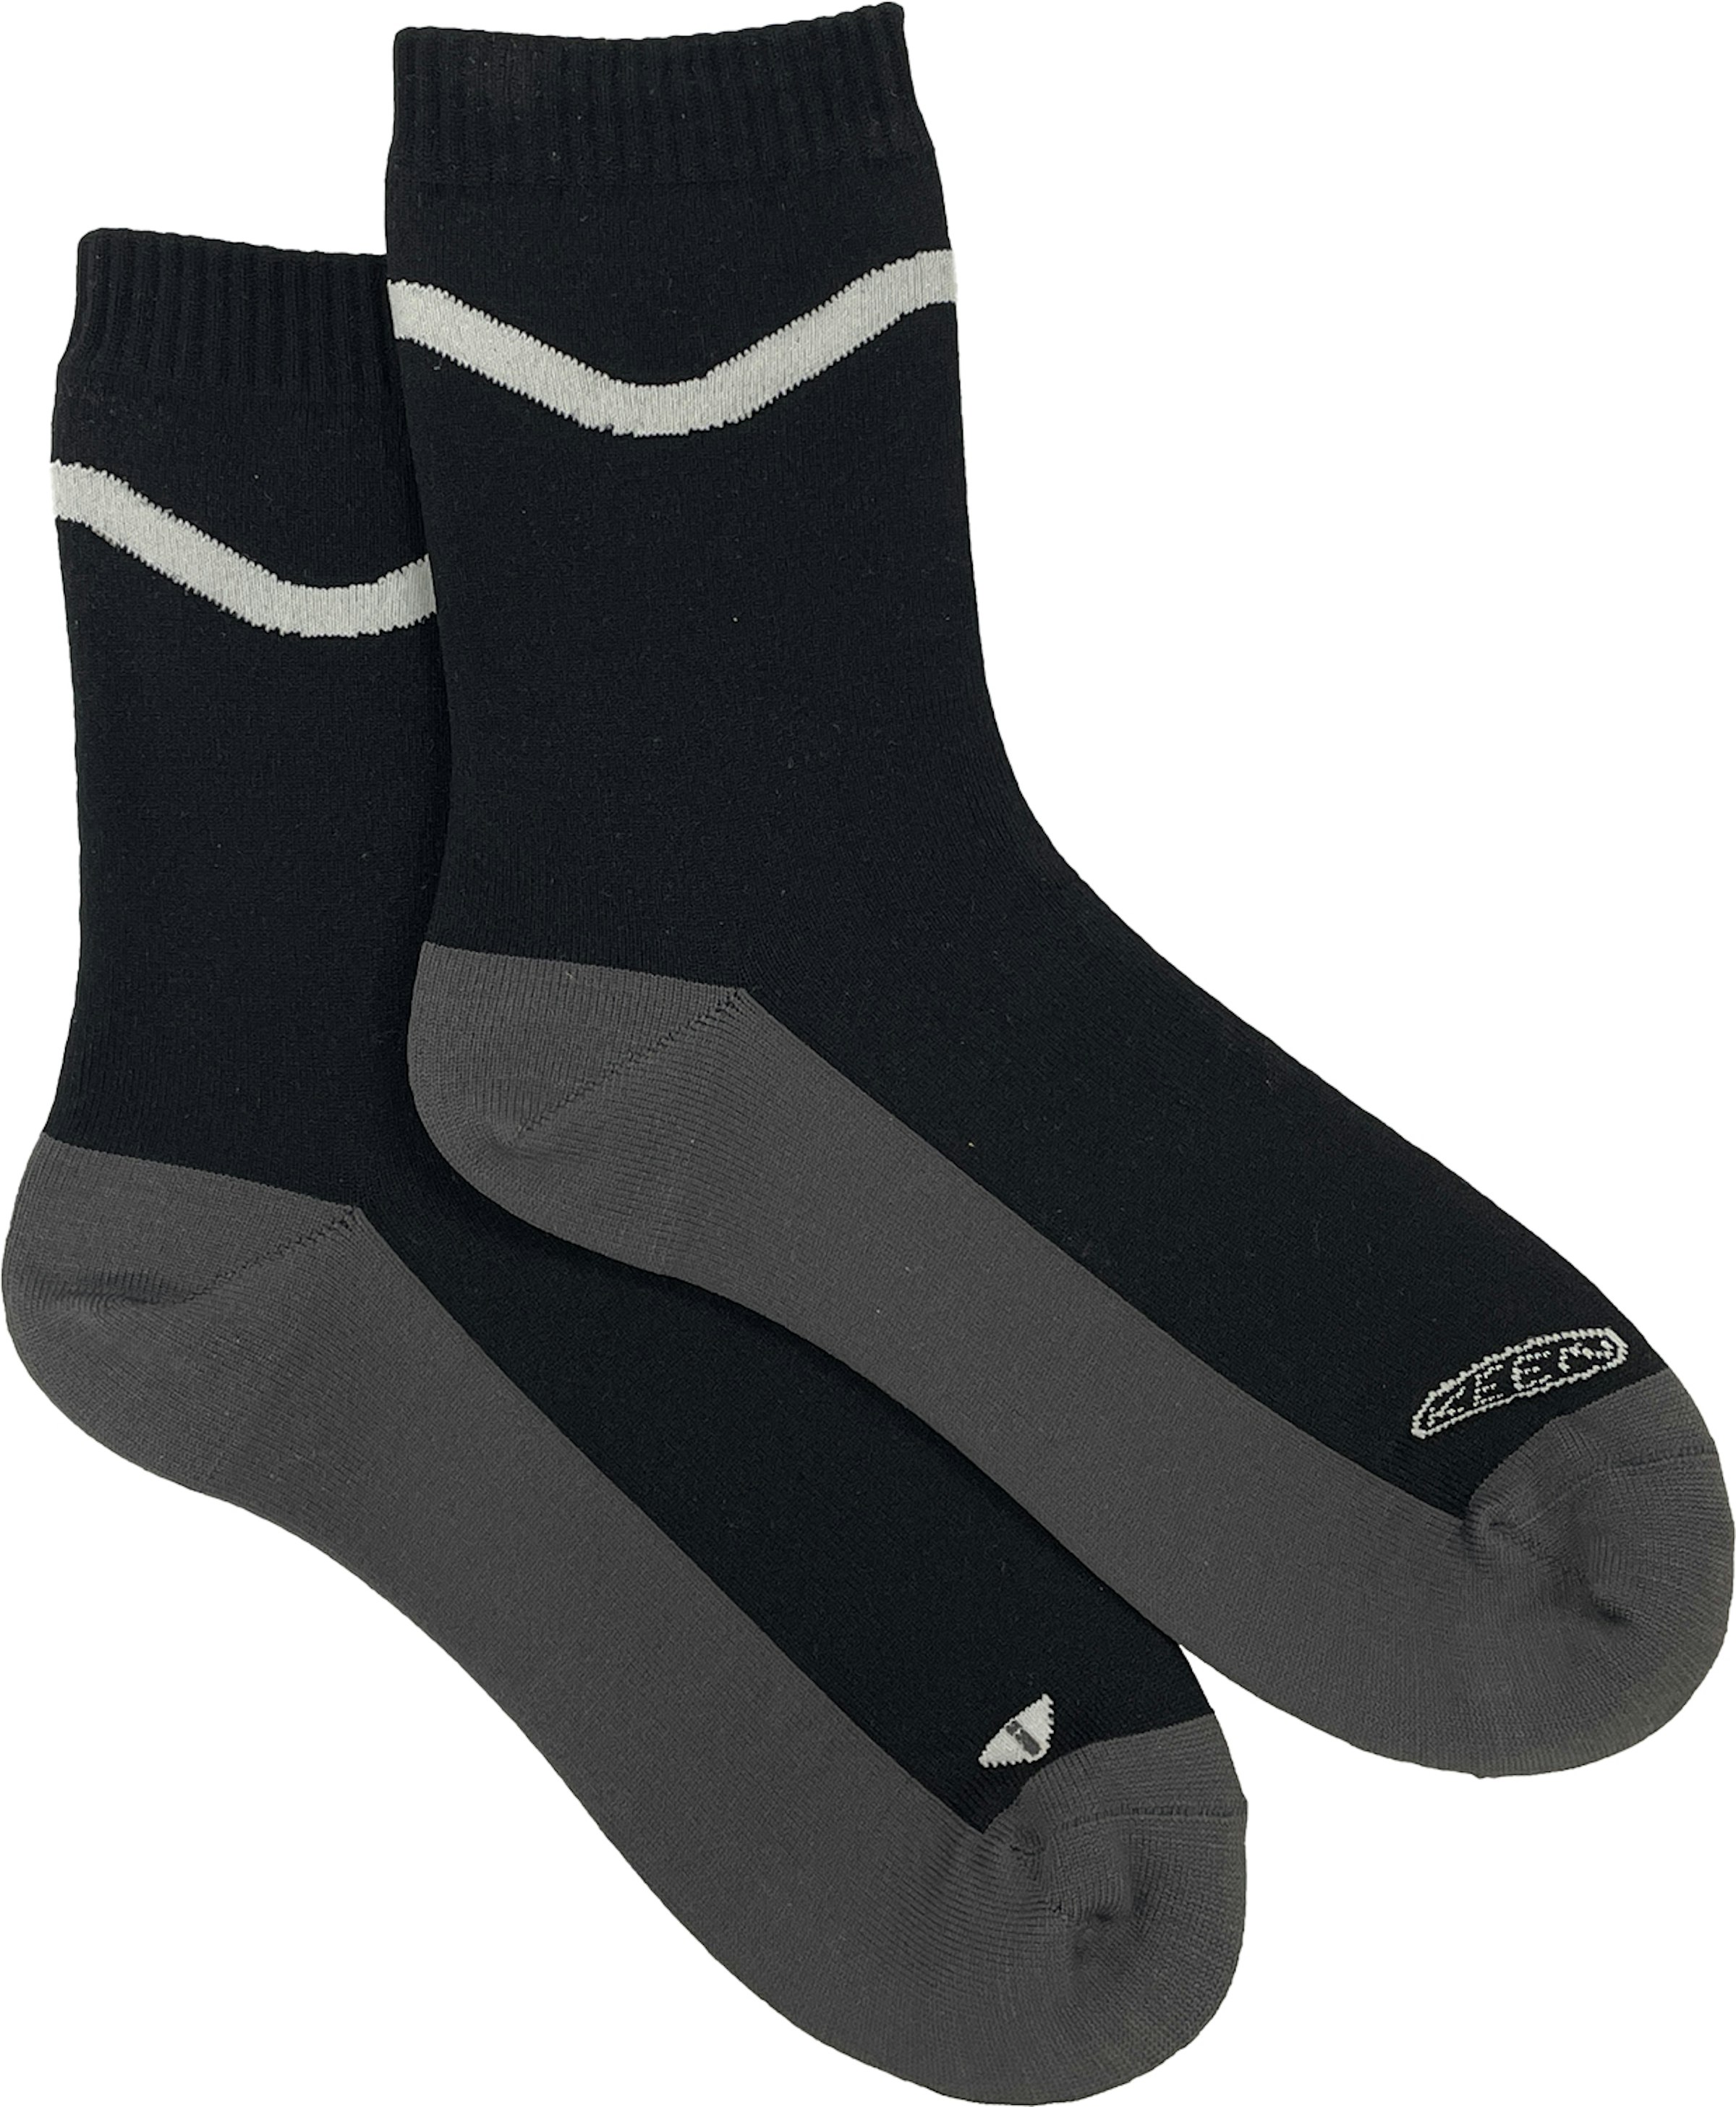 The white line on the black socks is inspired by Mount Hood, the iconic snow-capped mountain of Portland